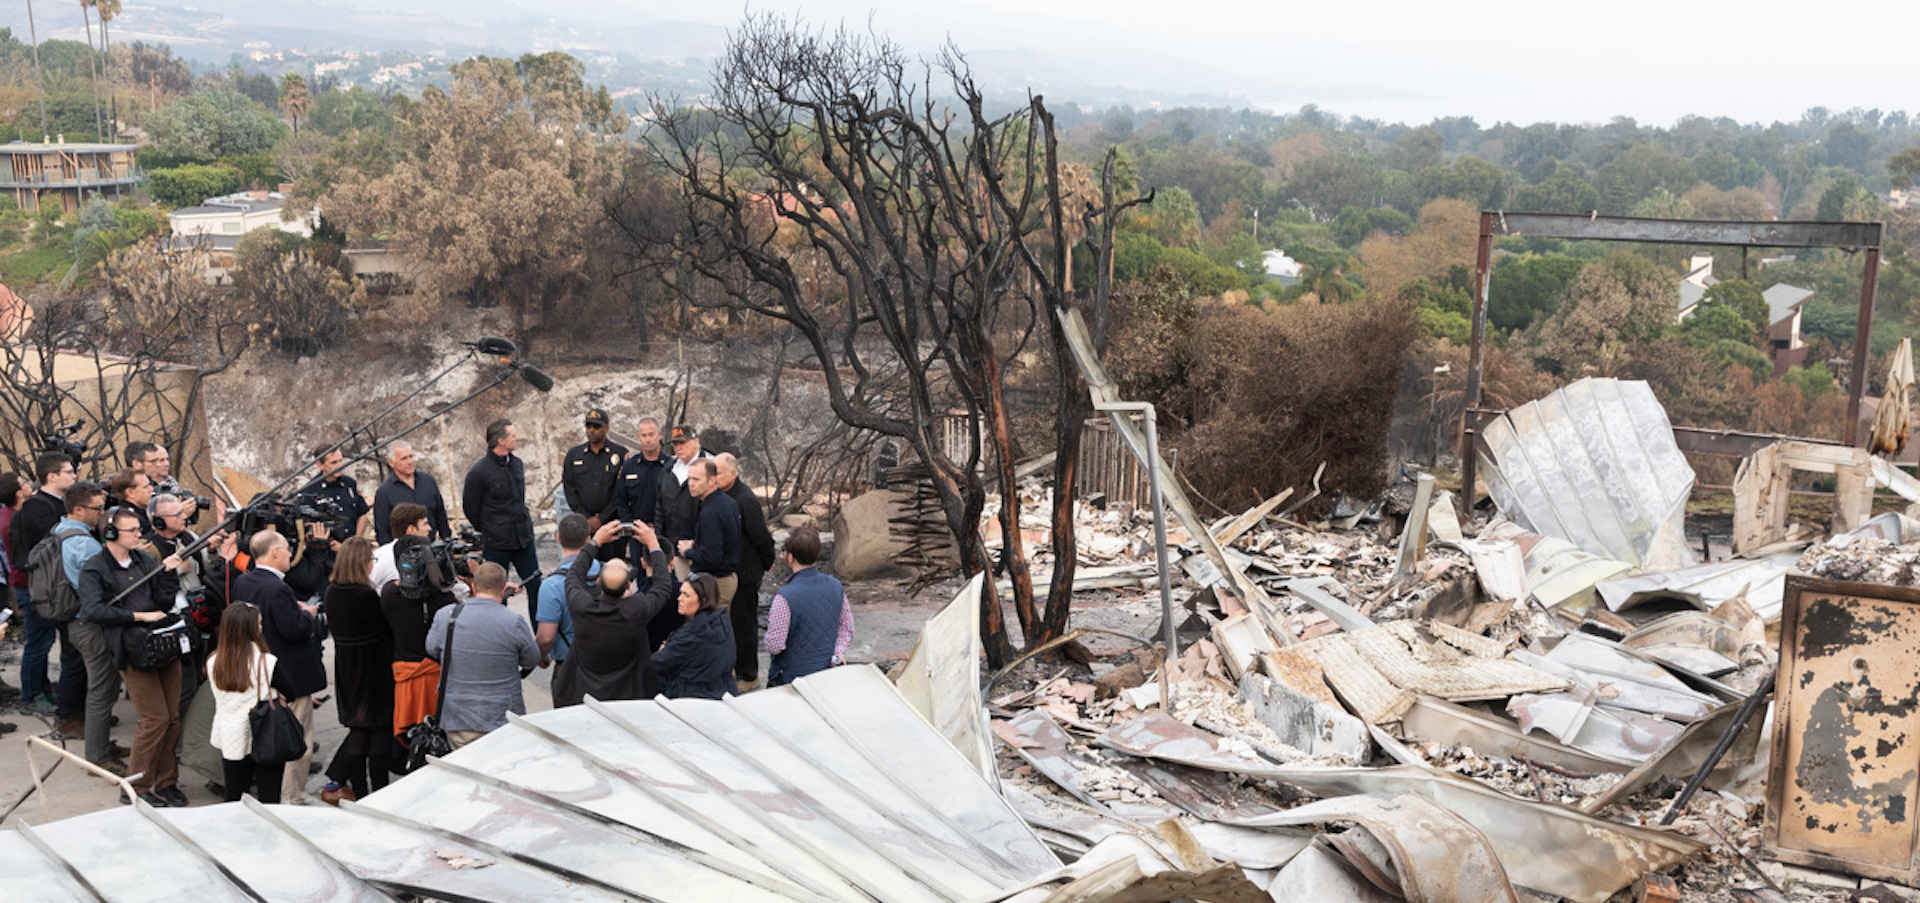 Trump and team stand in front of a collapsed, burned out building in california surrounded by smog